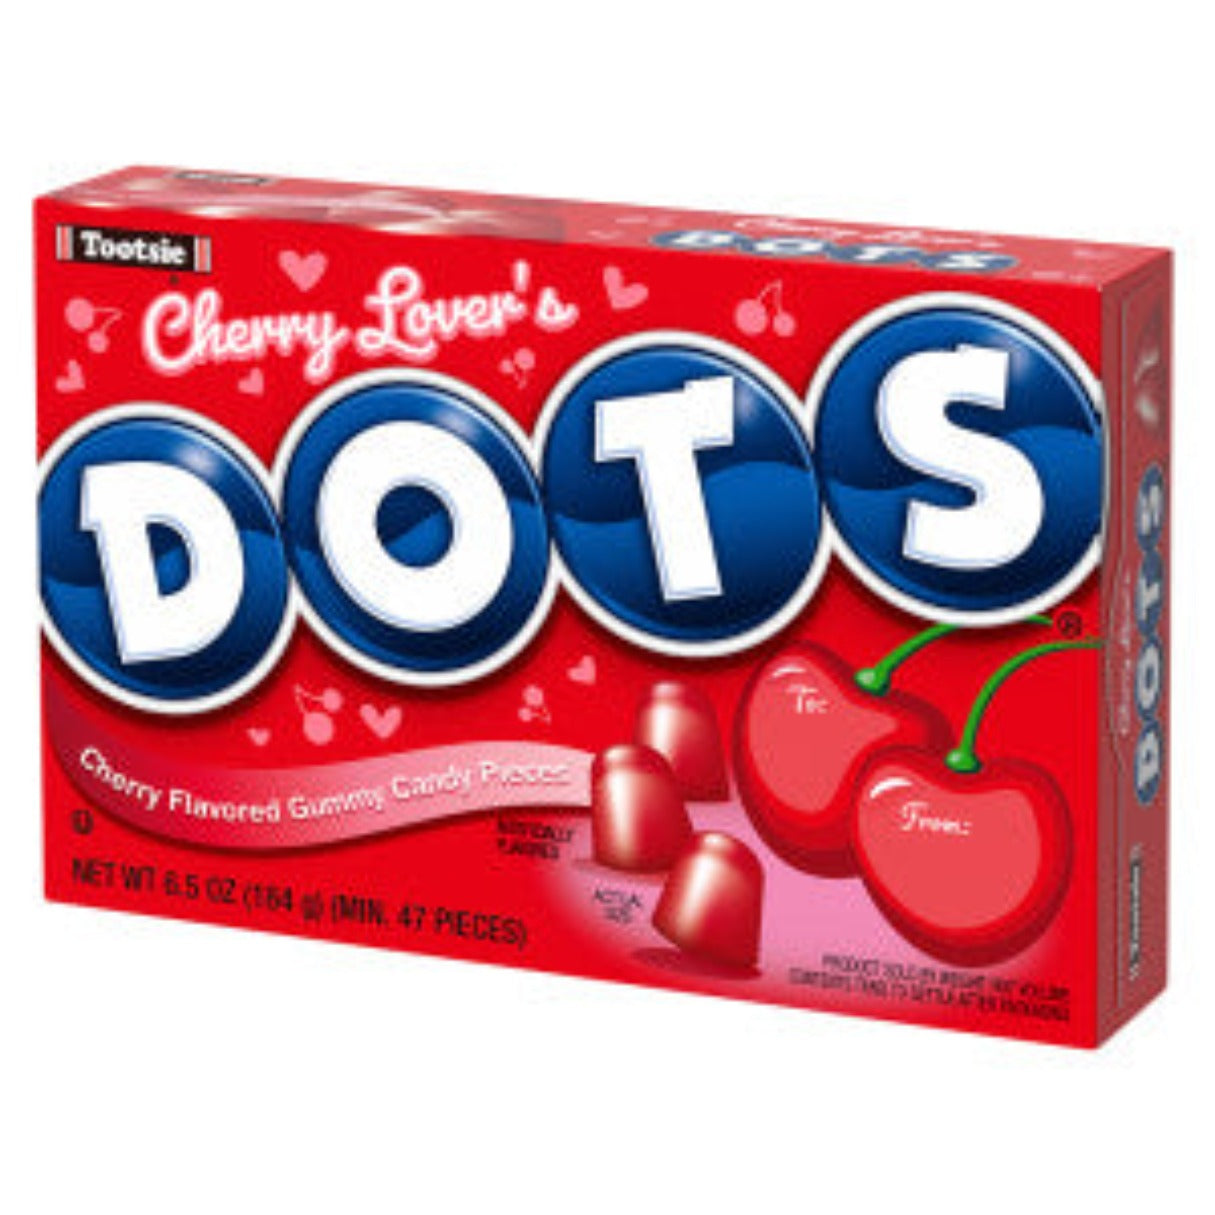 Dots Cherry Lovers Theater Box 6oz - 12ct